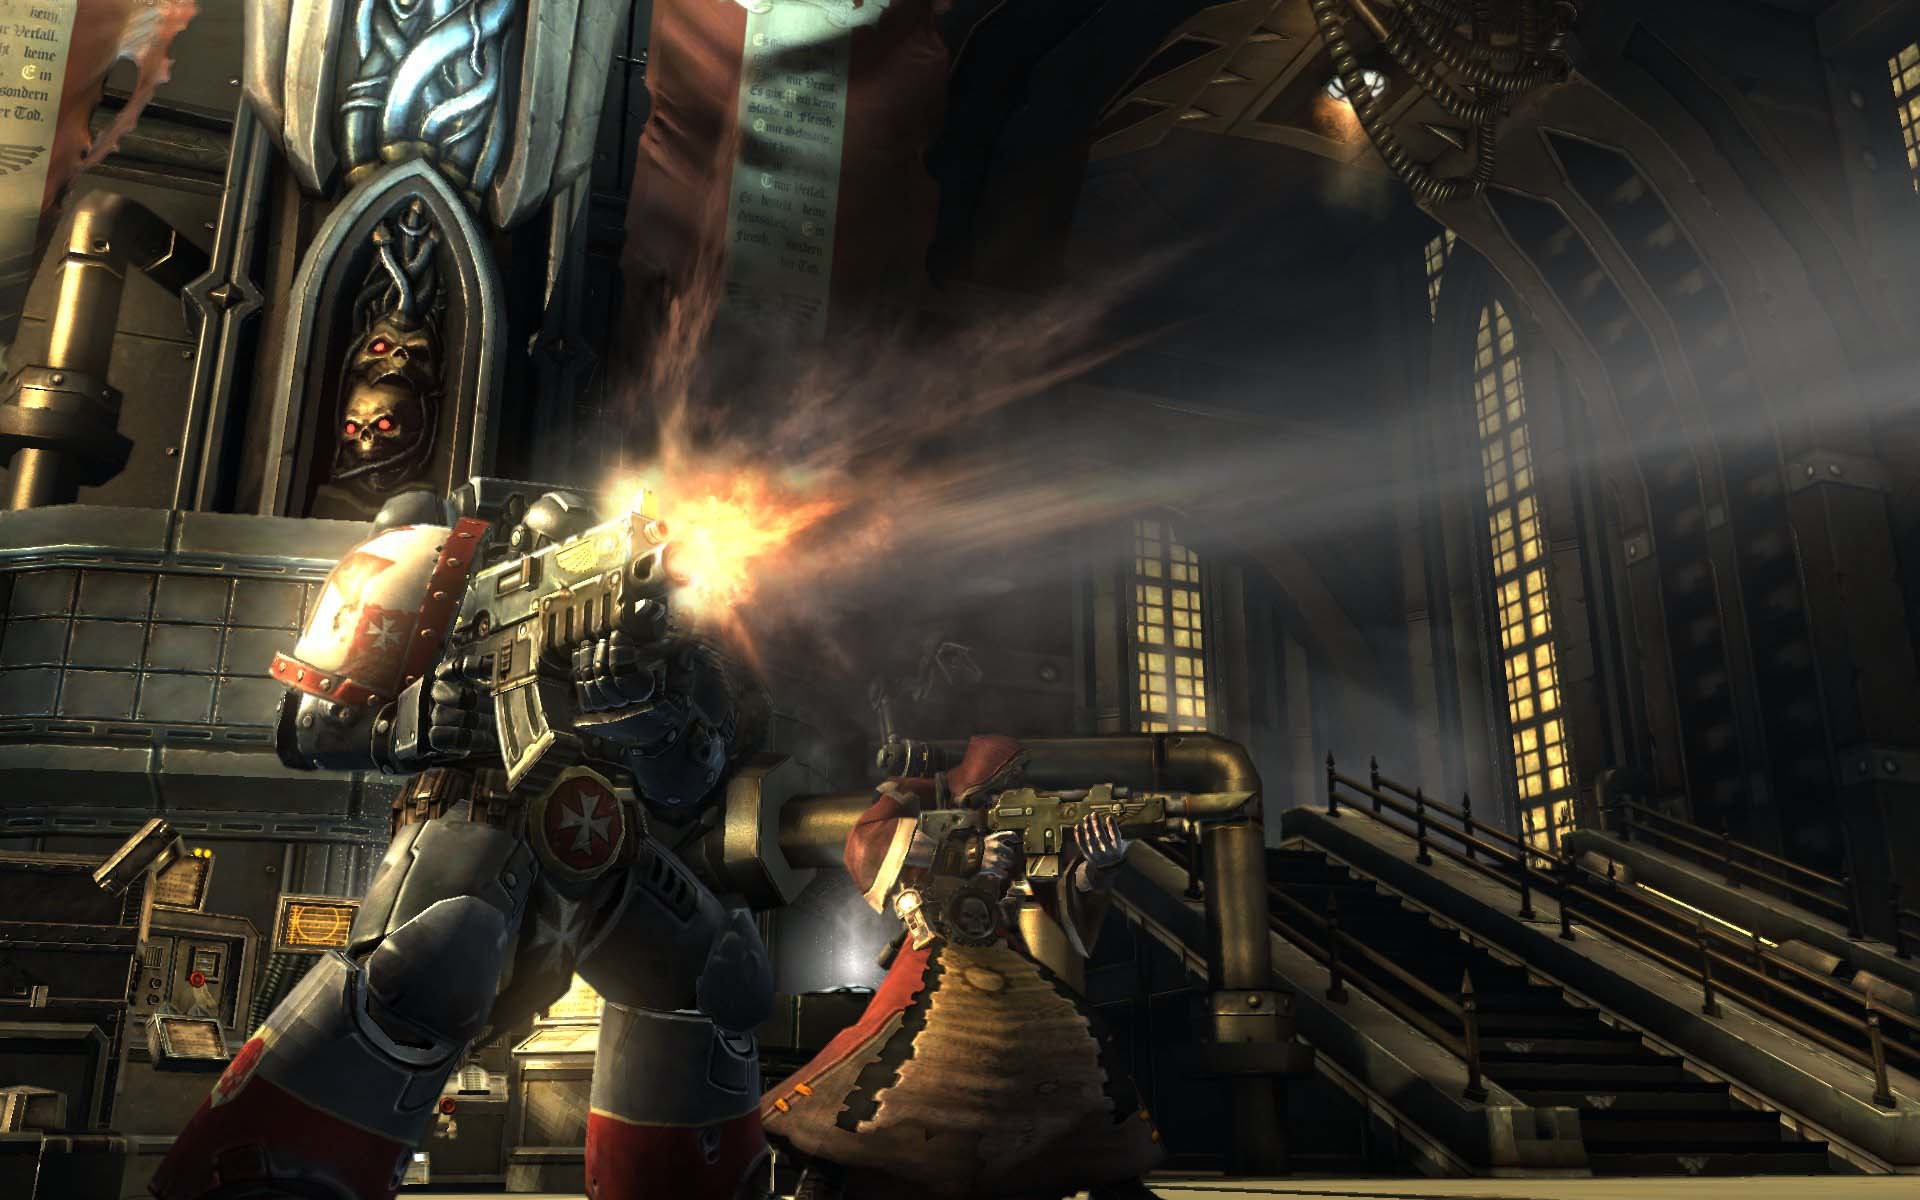 Along with the trailer weve got a bunch of images for Warhammer 40,000 Dark Millennium Online. Rather shiny they look, too